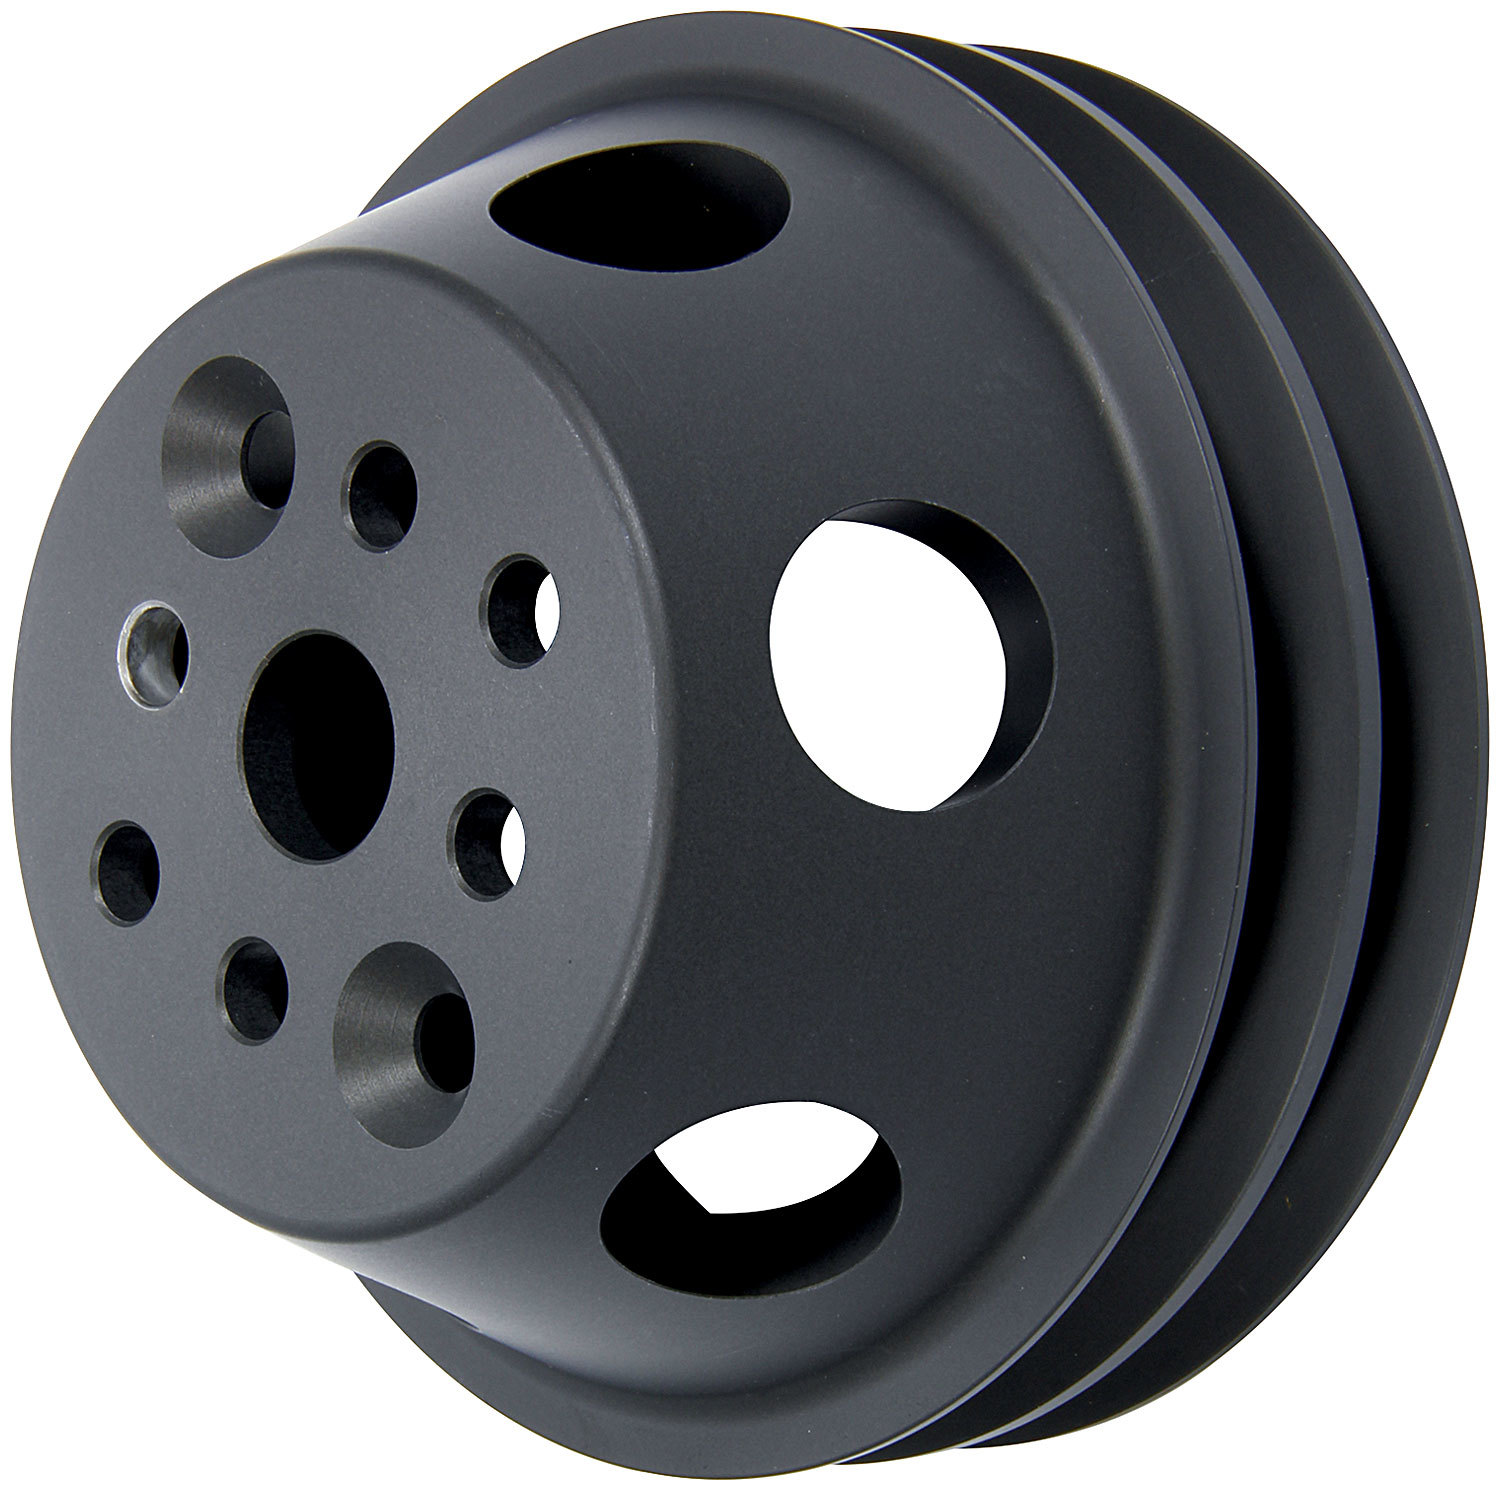 Water Pump Pulley - 1 to 1 - V-Belt - 2 Groove - 4.750 in Diameter - Aluminum - Black Anodized - Short Water Pump - Small Block Chevy - Each